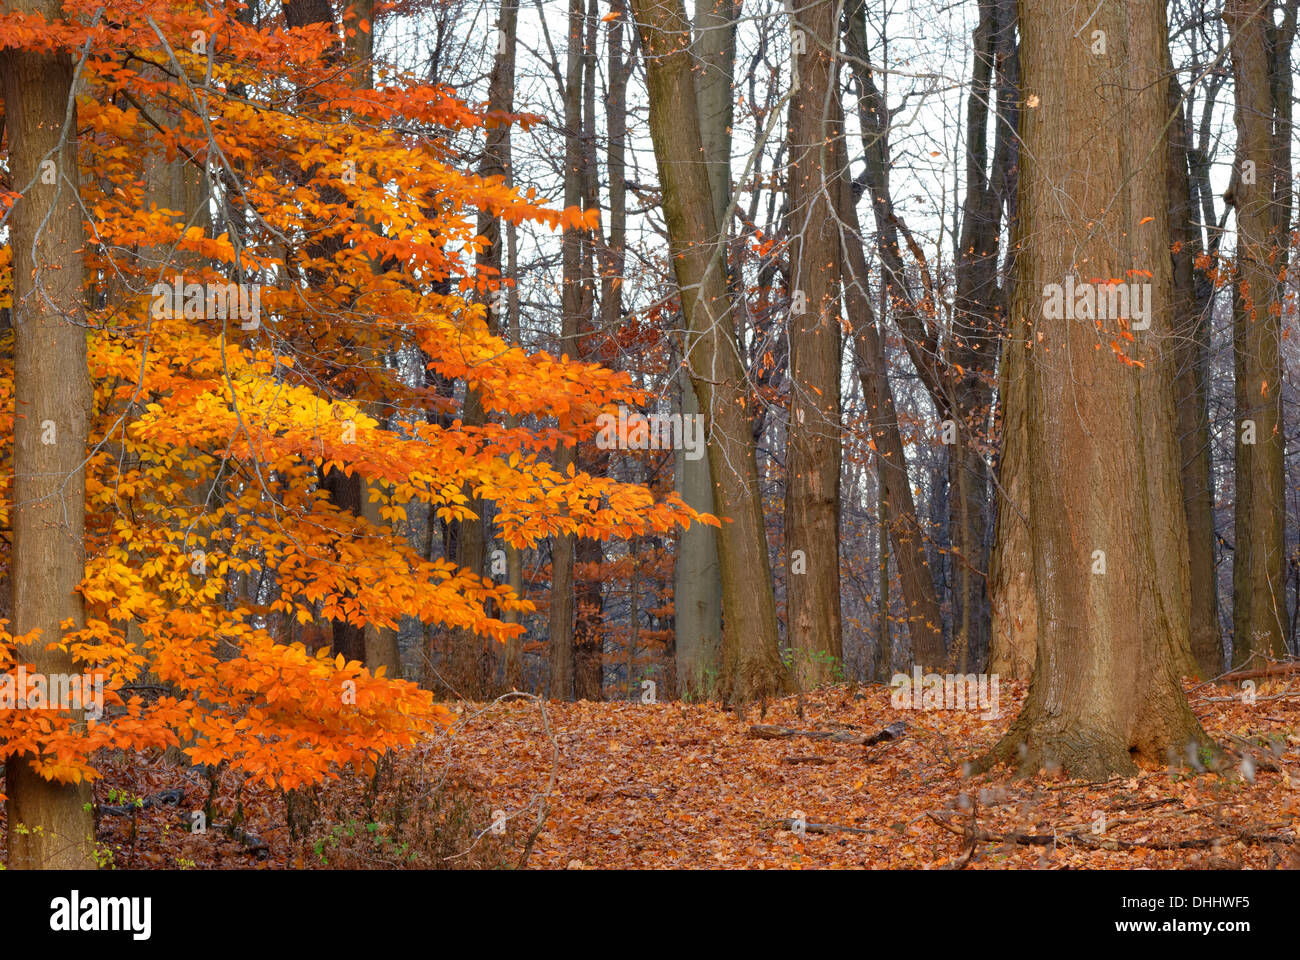 American Beech Tree nature background image in late fall early winter in western New York state region. Stock Photo